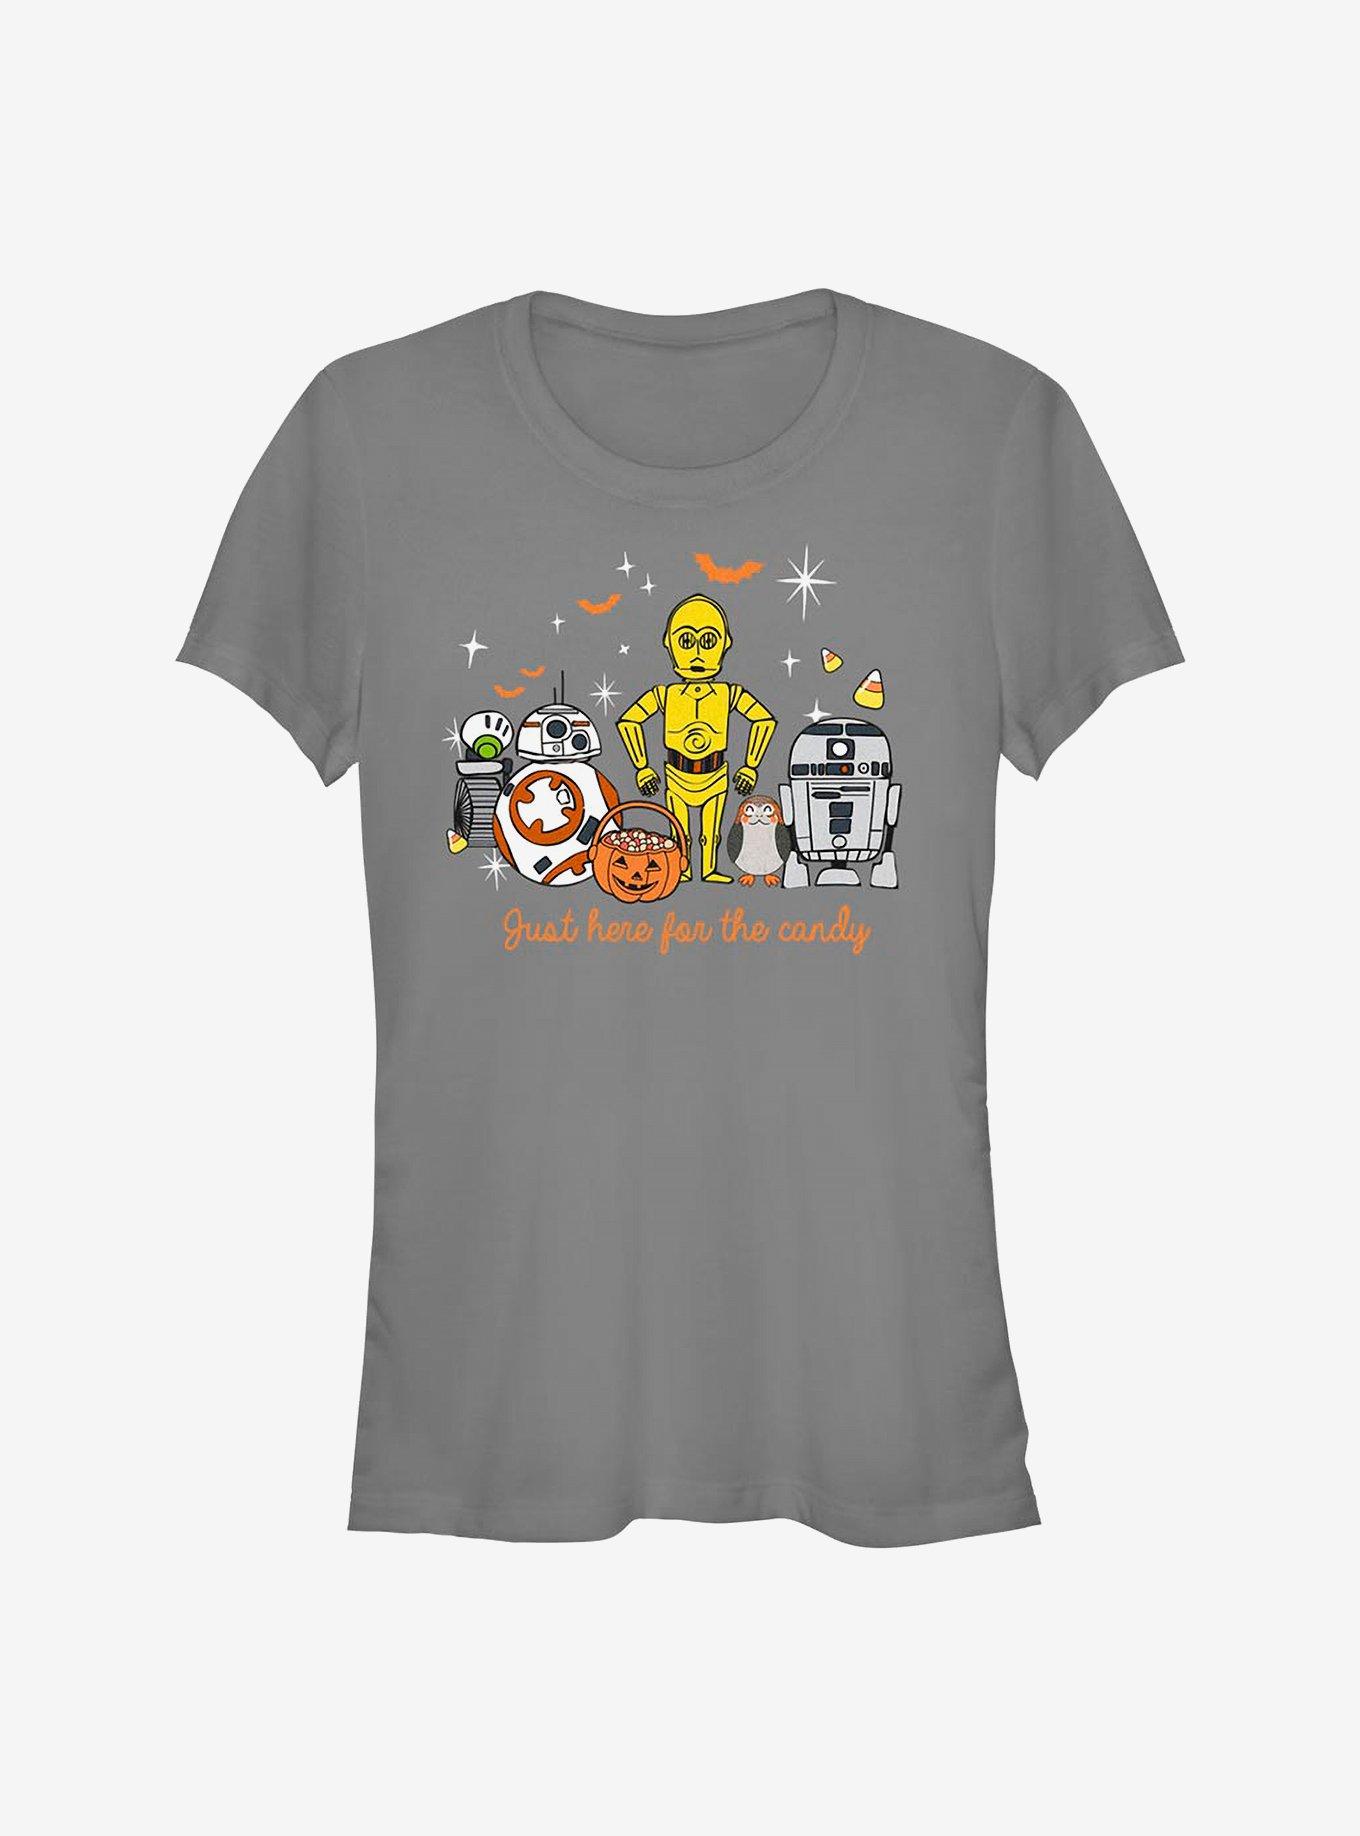 Star Wars Here For Candy Girls T-Shirt, CHARCOAL, hi-res